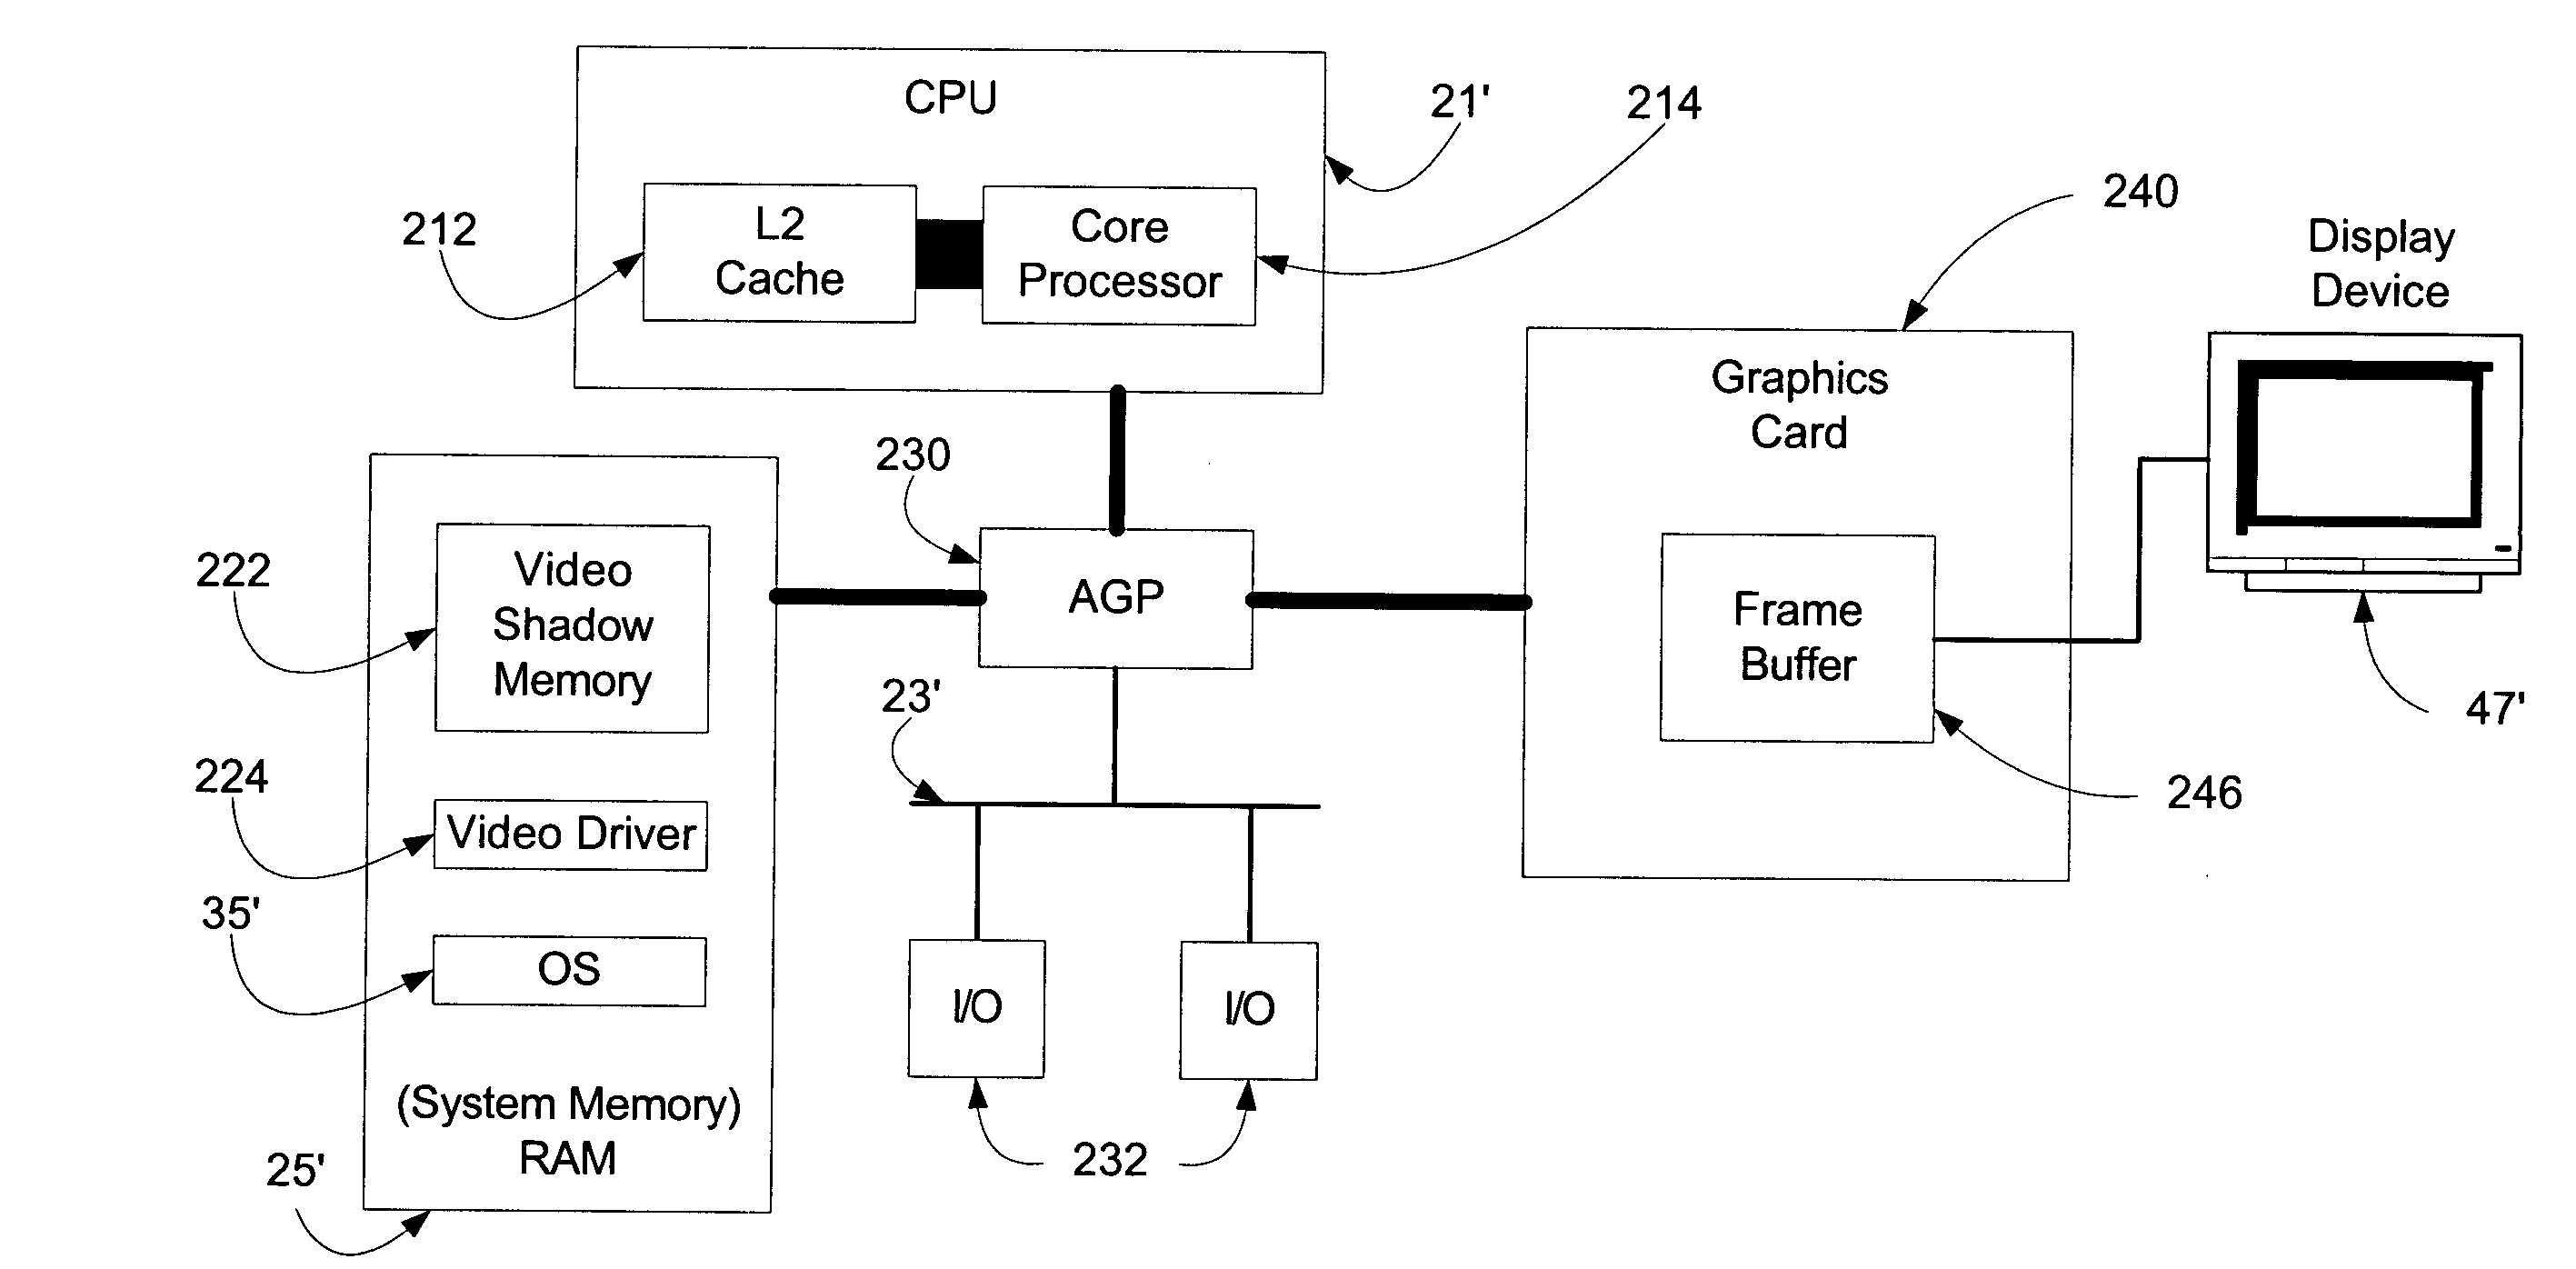 Systems and methods for efficiently updating complex graphics in a computer system by by-passing the graphical processing unit and rendering graphics in main memory